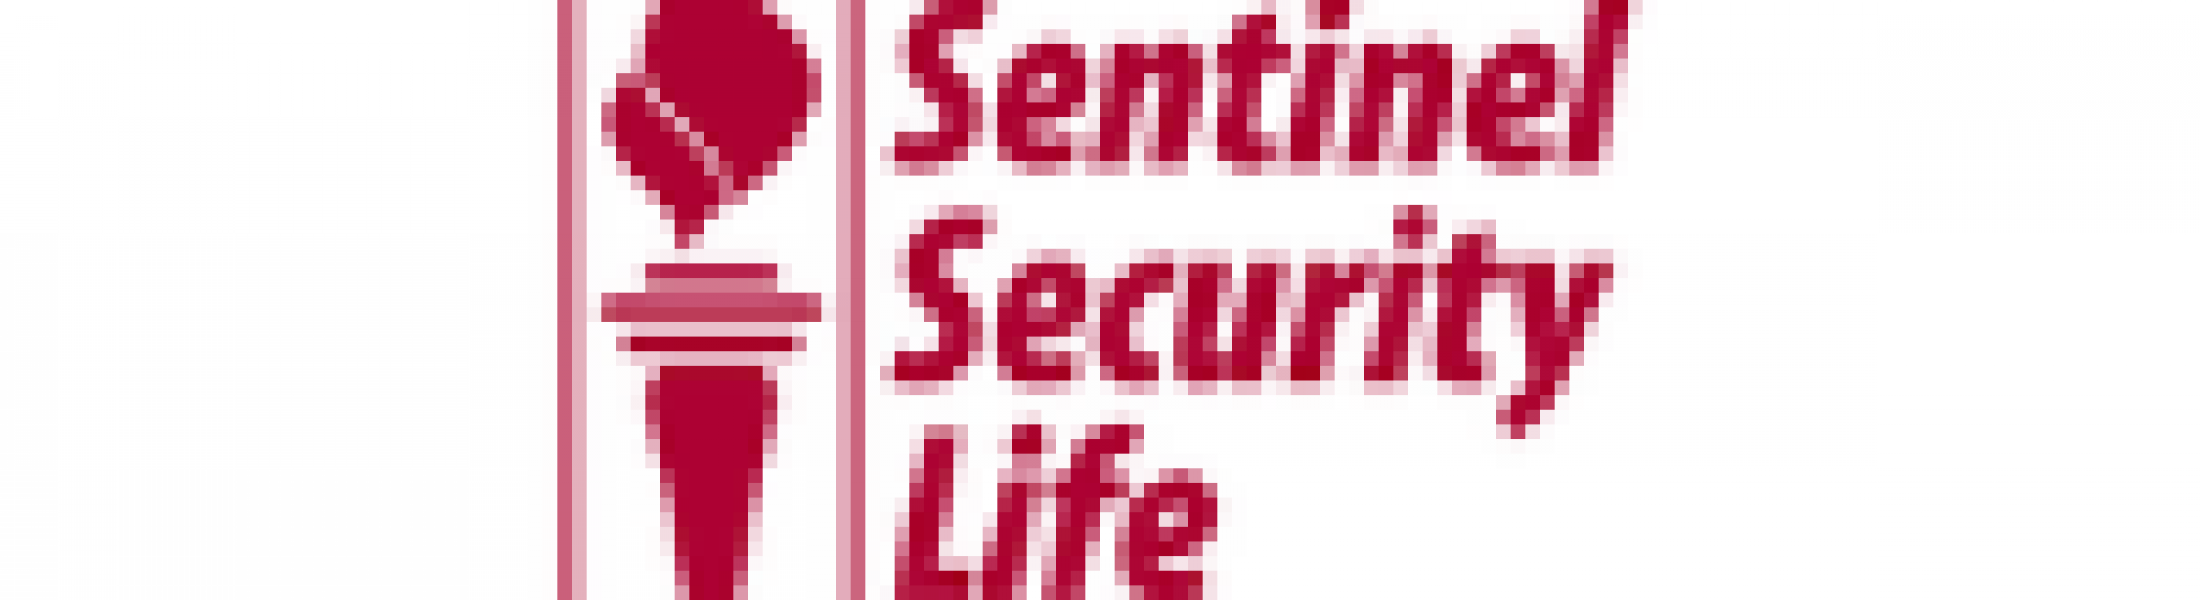 sentinel security life reviews